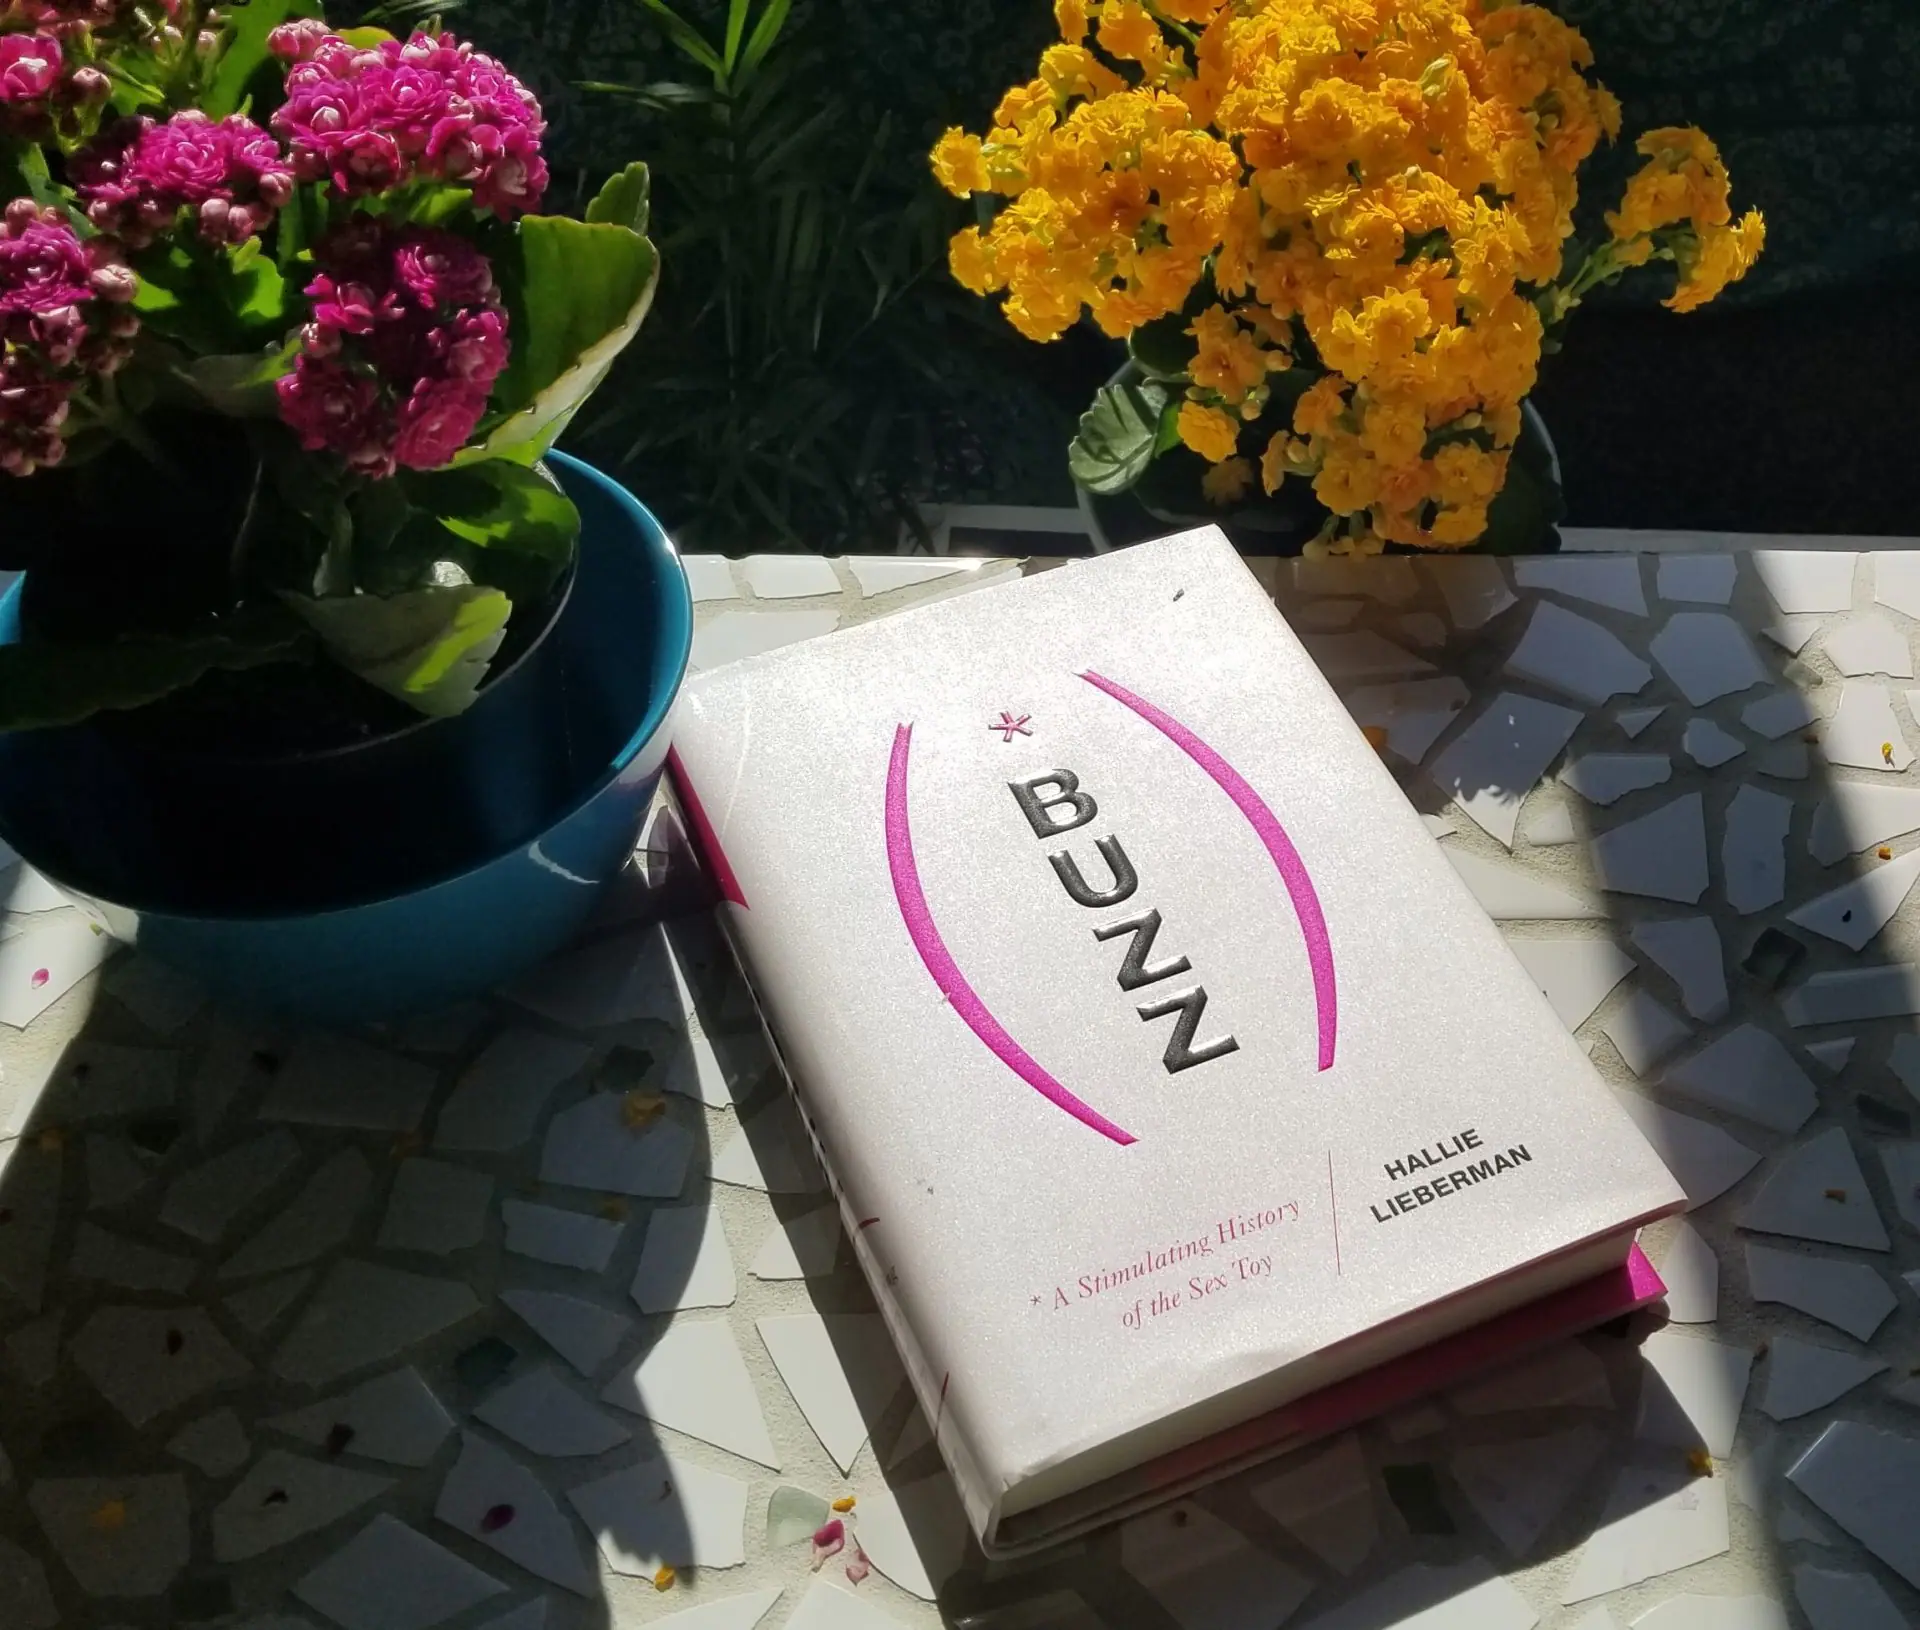 A concise review of Buzz, a captivating sex toy with a rich history and exciting features.